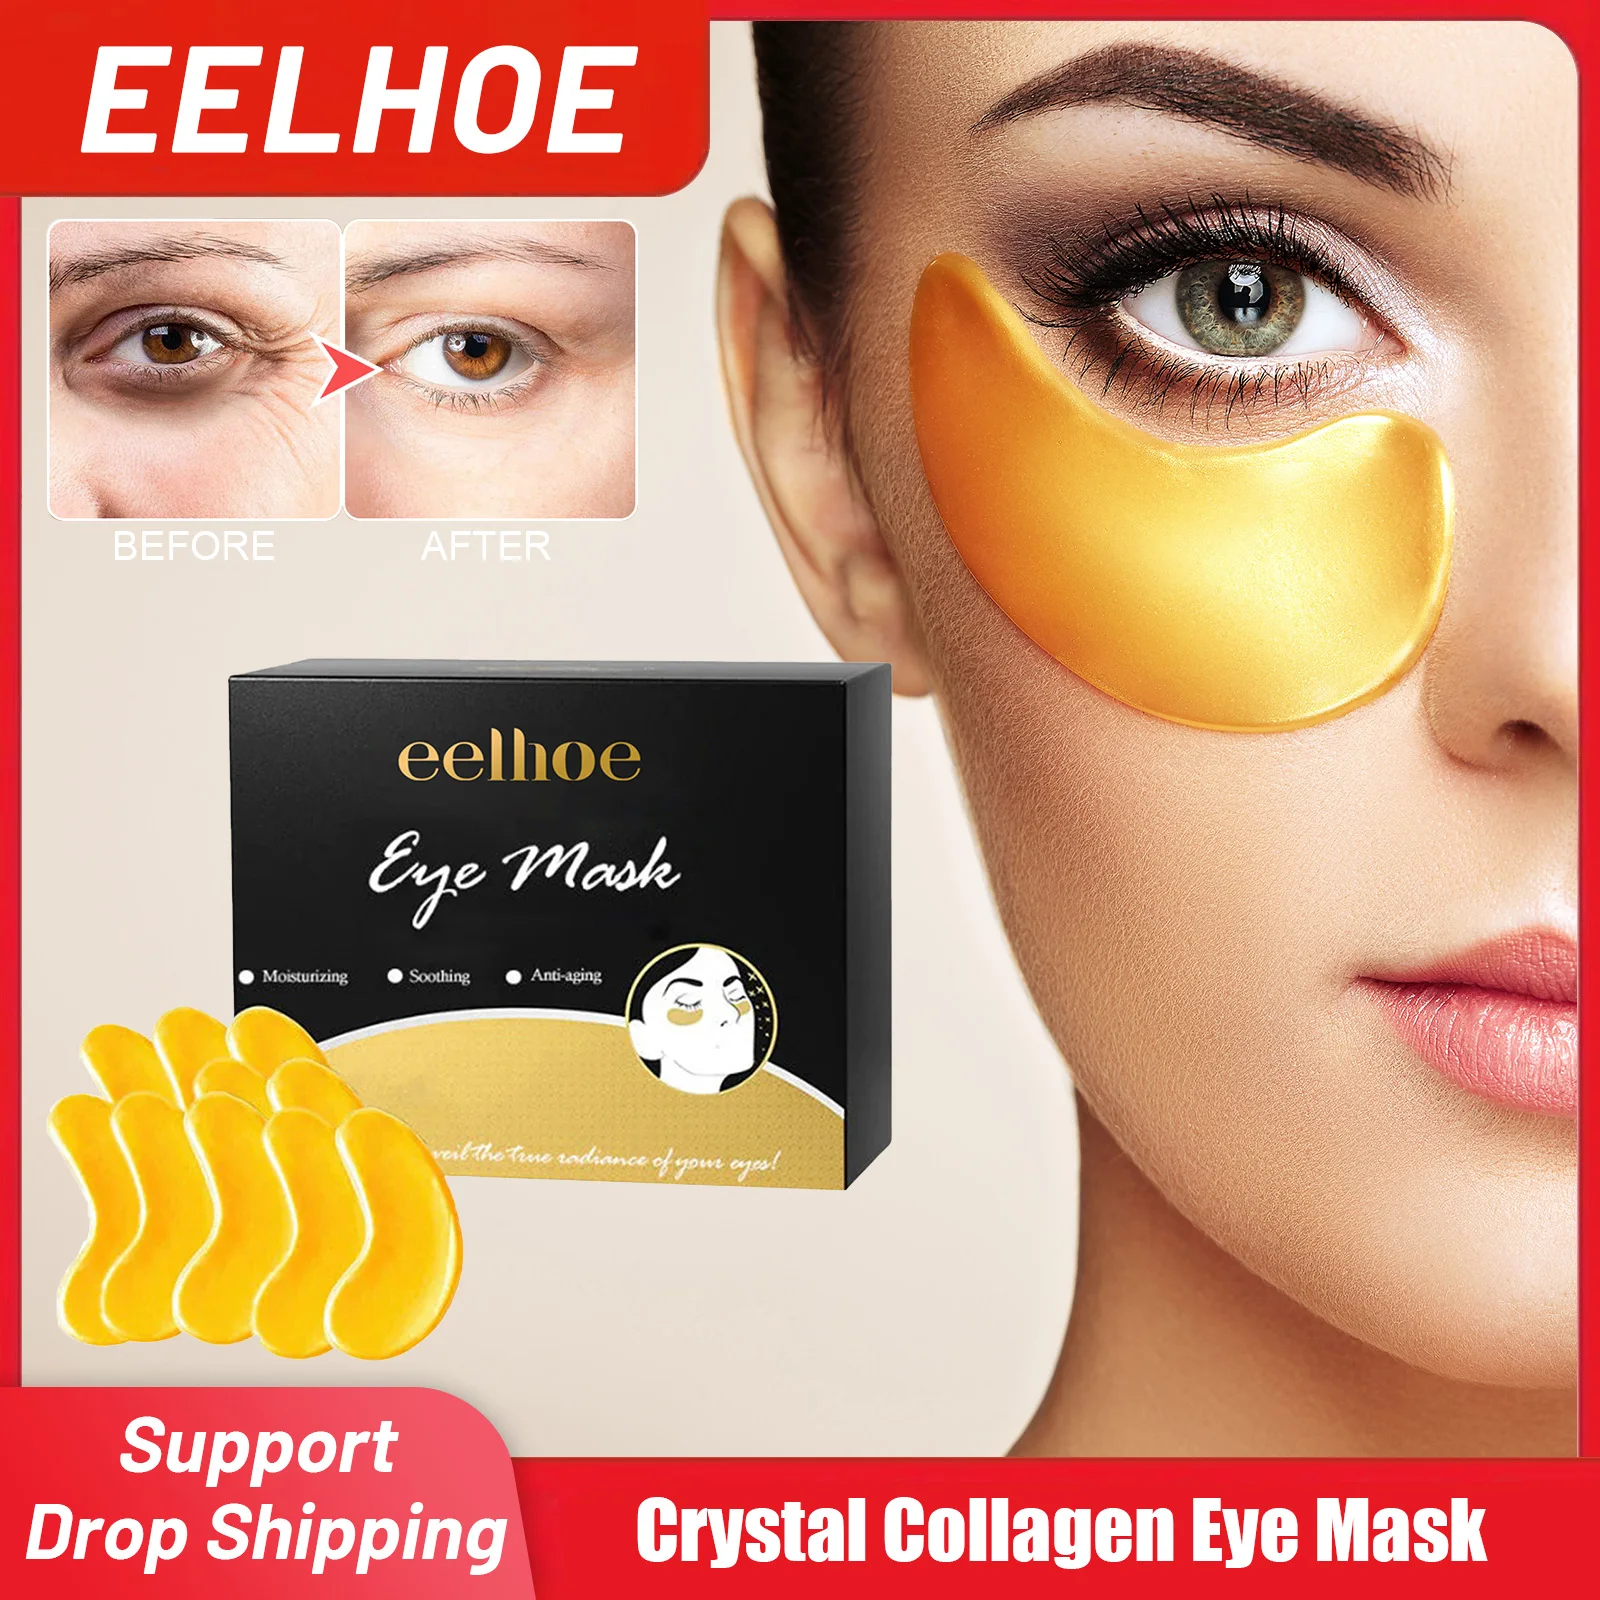 

24k Gold Crystal Collagen Eye Mask Anti Aging Improve Eye Bags Remove Puffiness Fade Dark Circles Moisturize Brighten Eye Patch